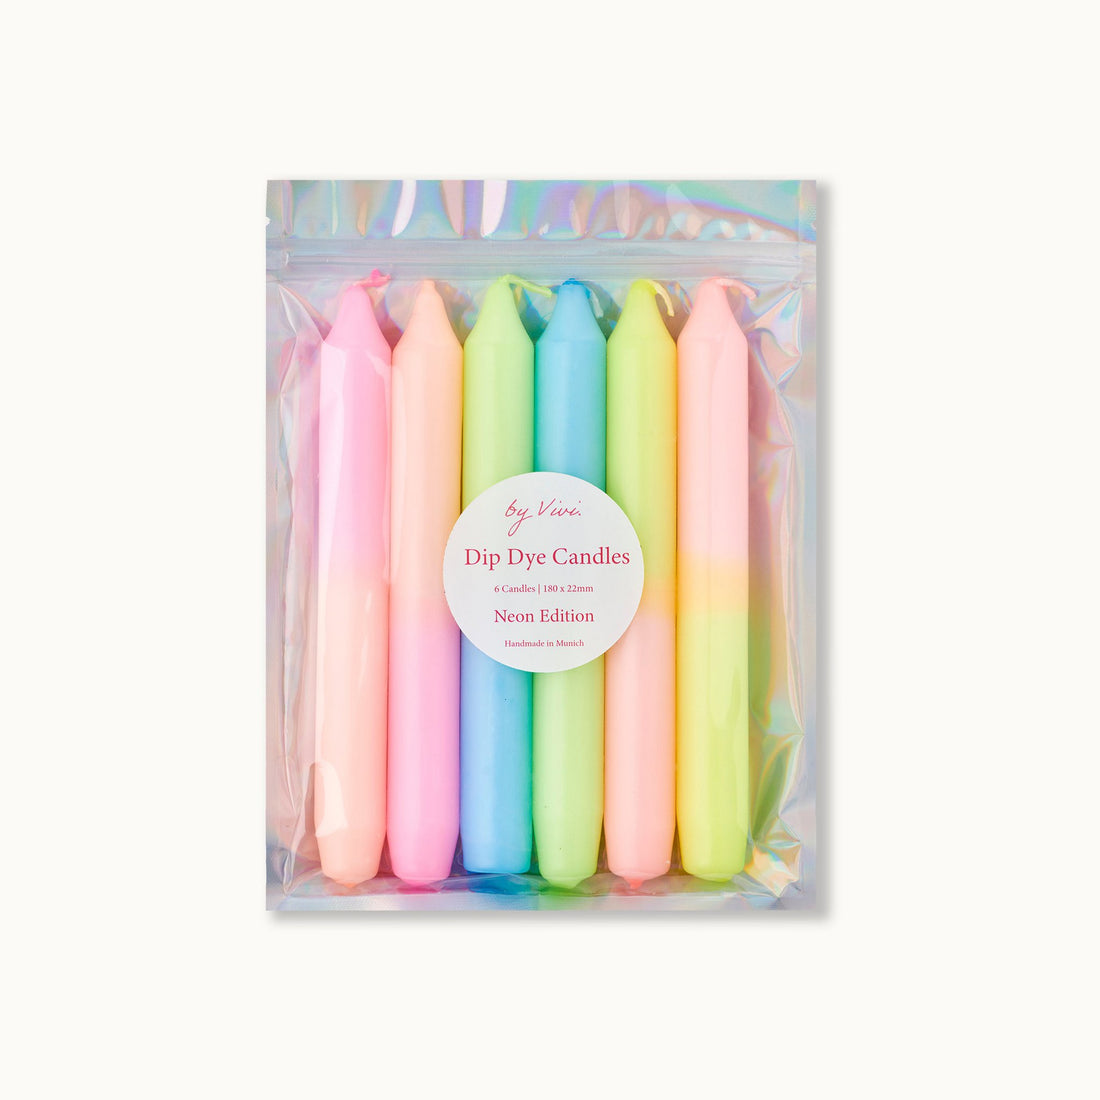 Dip dye candles in a set: Neon Edition